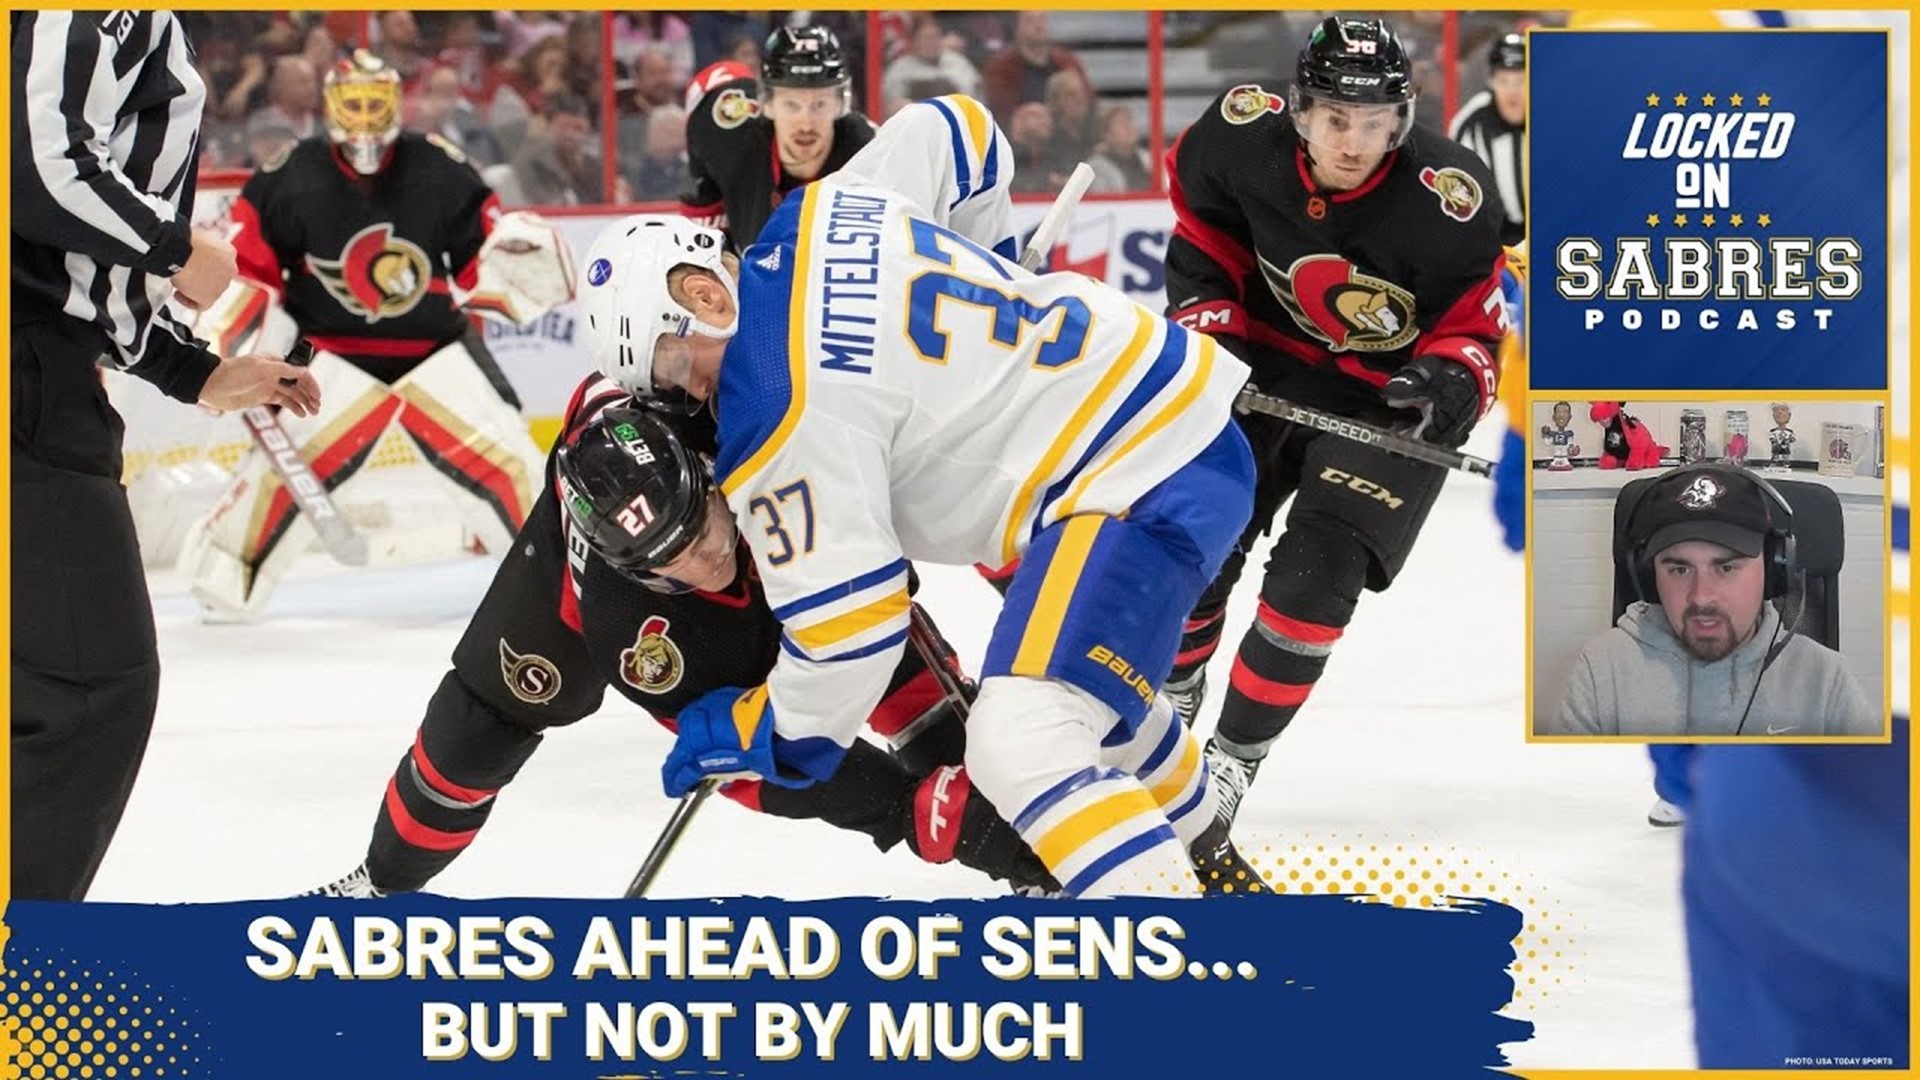 Sabres build ahead of Senators... but not by much